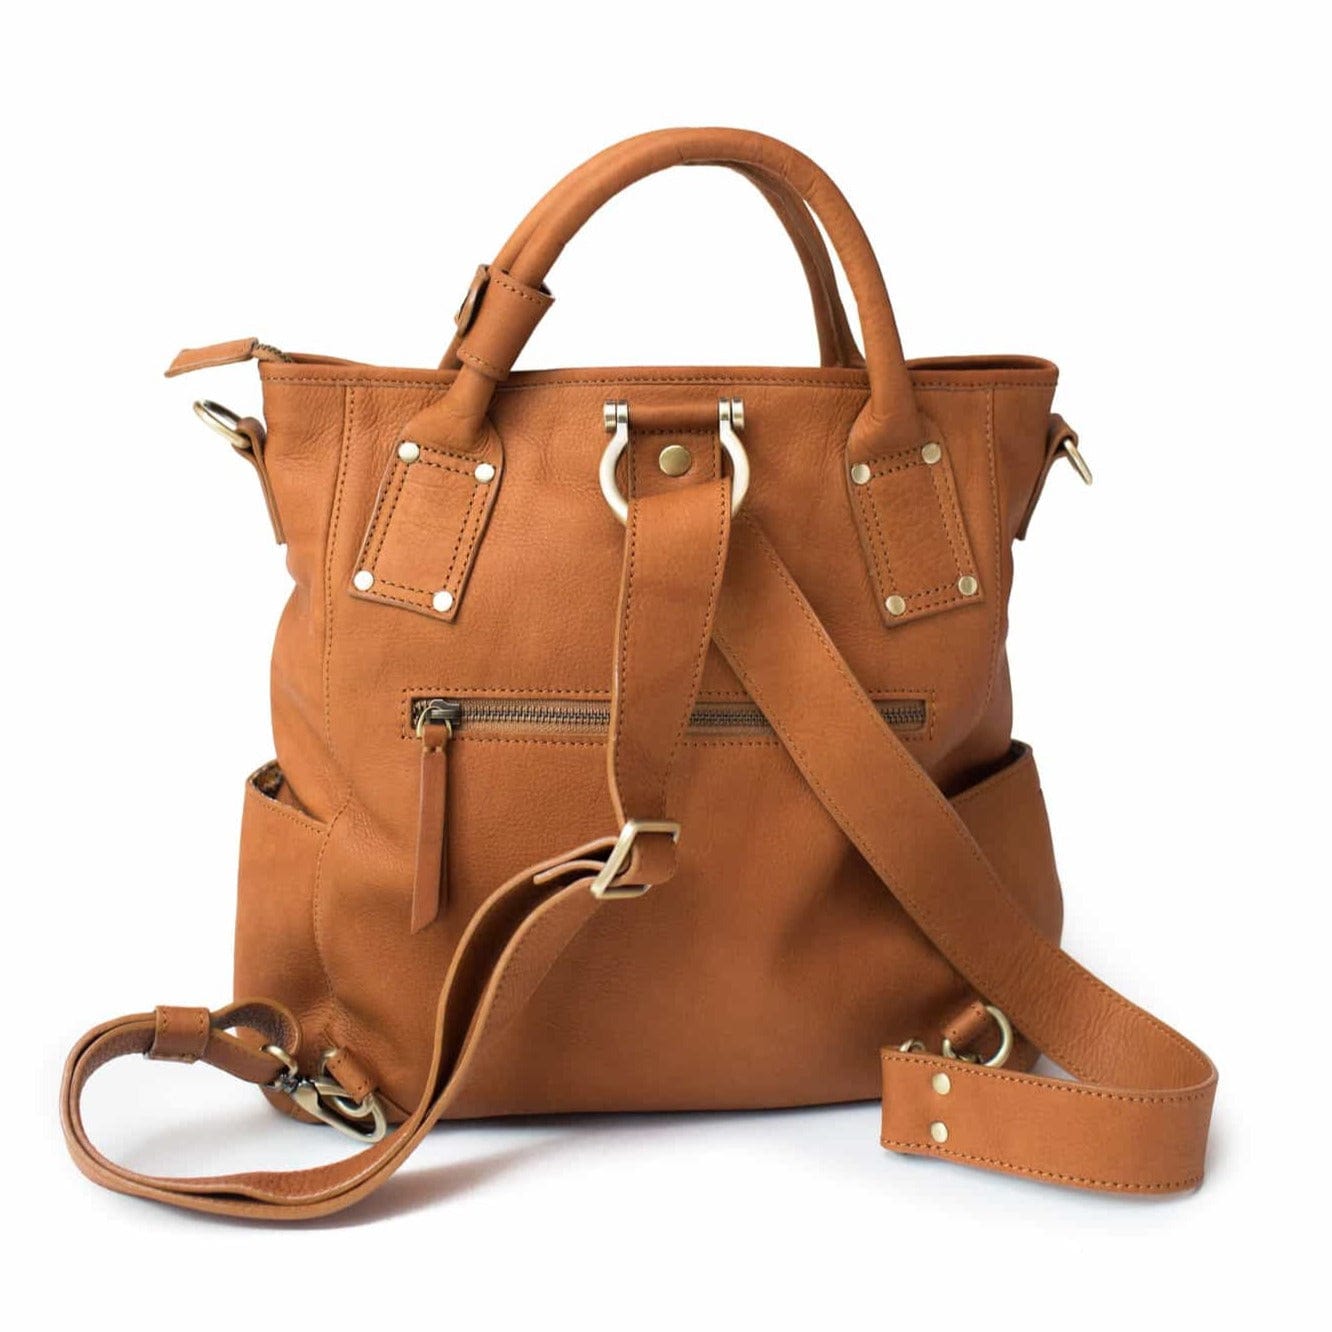 Whisky tan Chloe leather crossbody backpack with top handles, zippered closure, and side pockets.